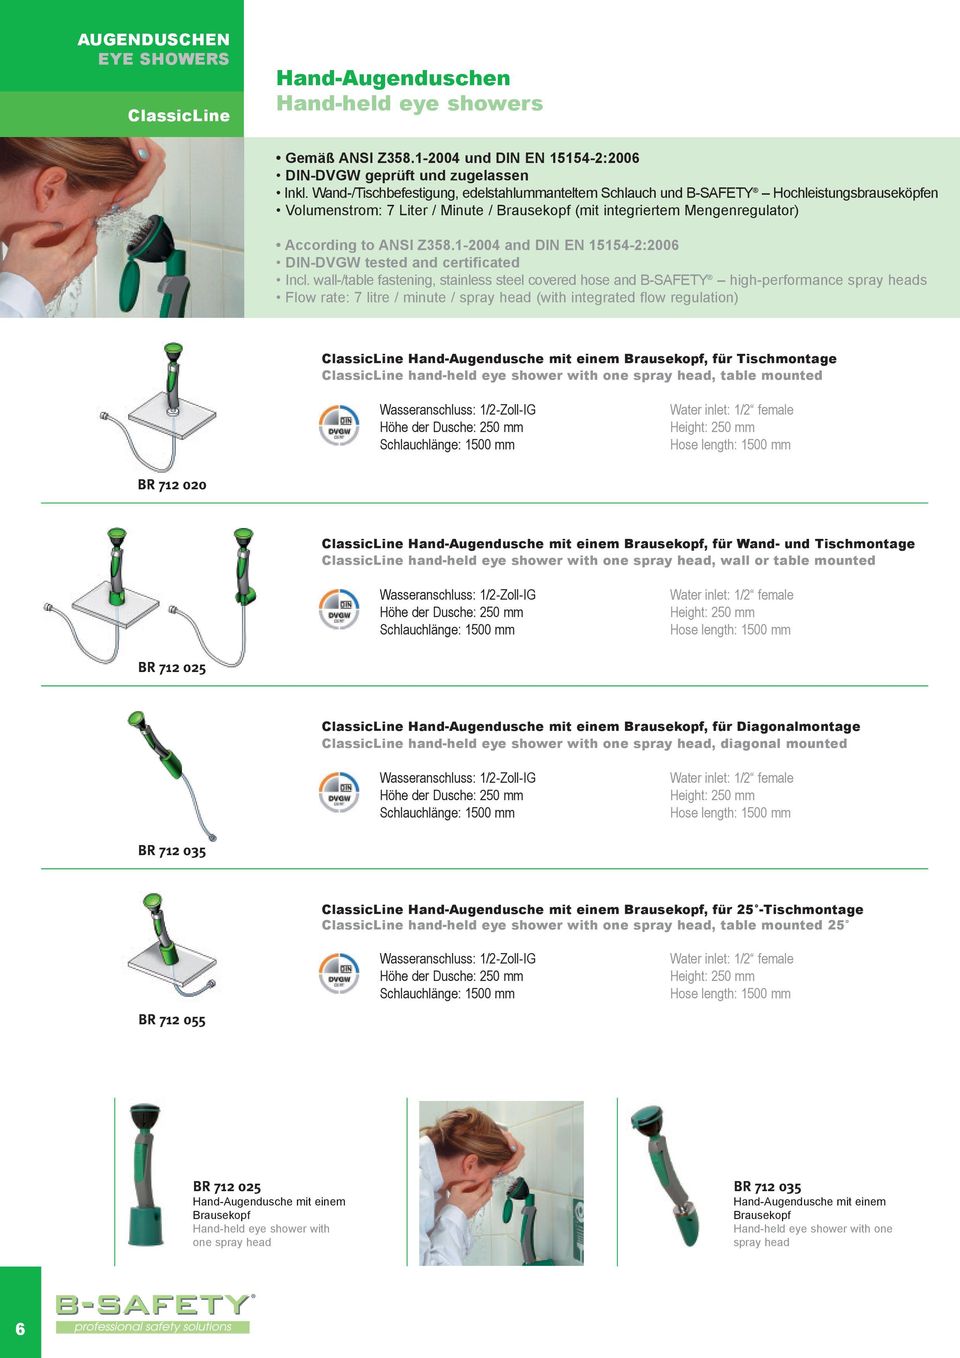 wall-/table fastening, covered hose and B-SAFETy high-performance spray heads Flow rate: 7 litre / minute / spray head (with integrated flow regulation) classicline hand-augendusche mit einem